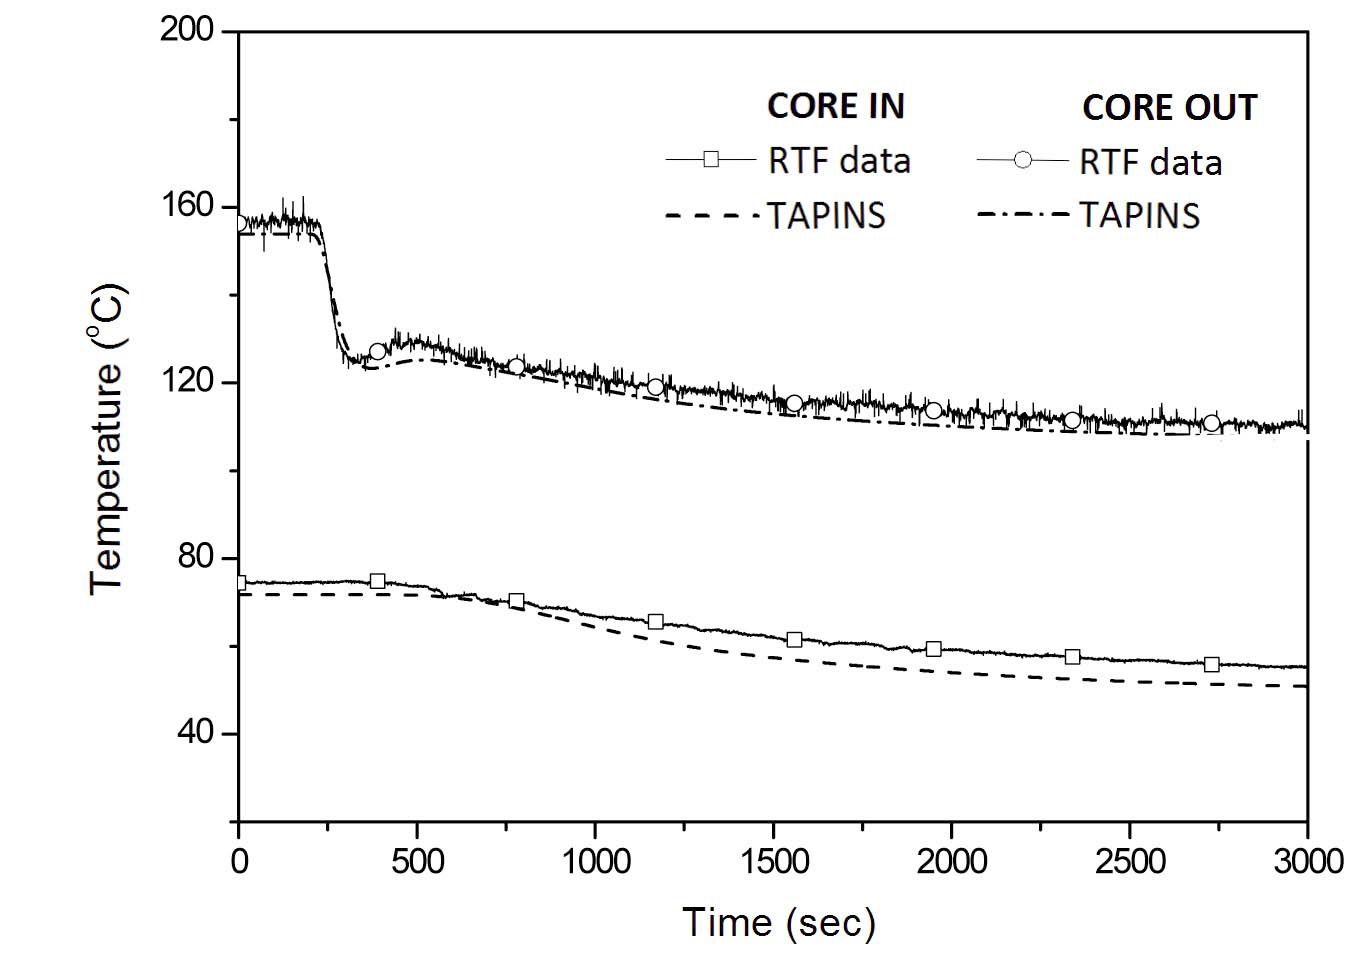 Coolant Temperatures in Response to a Reduction in Core Power